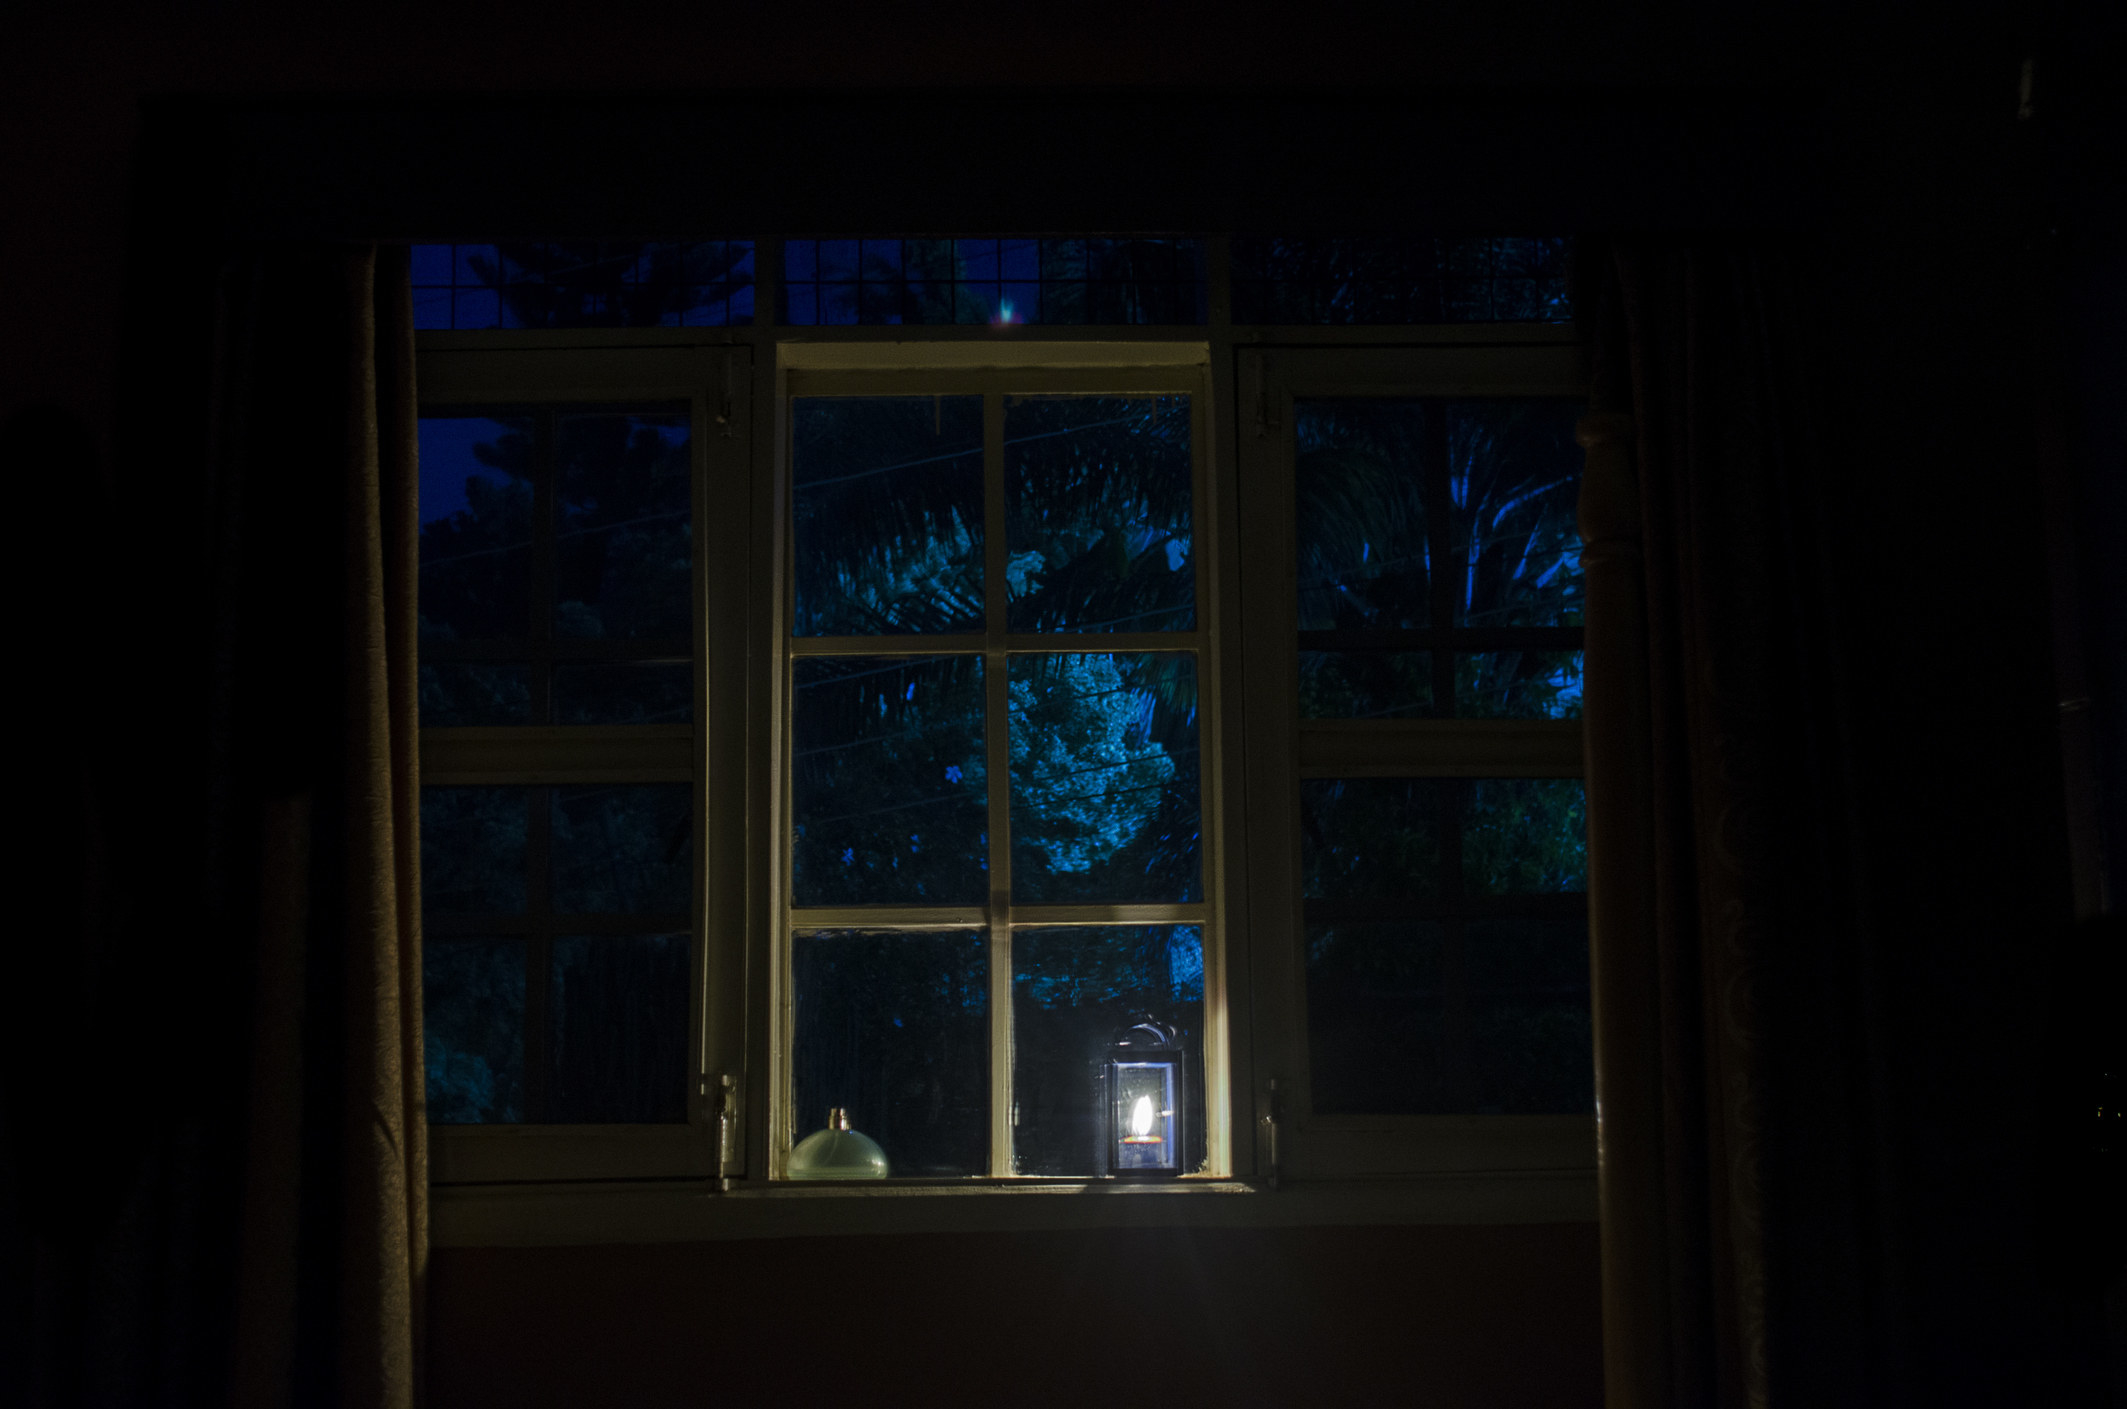 A window with a lantern on the sill